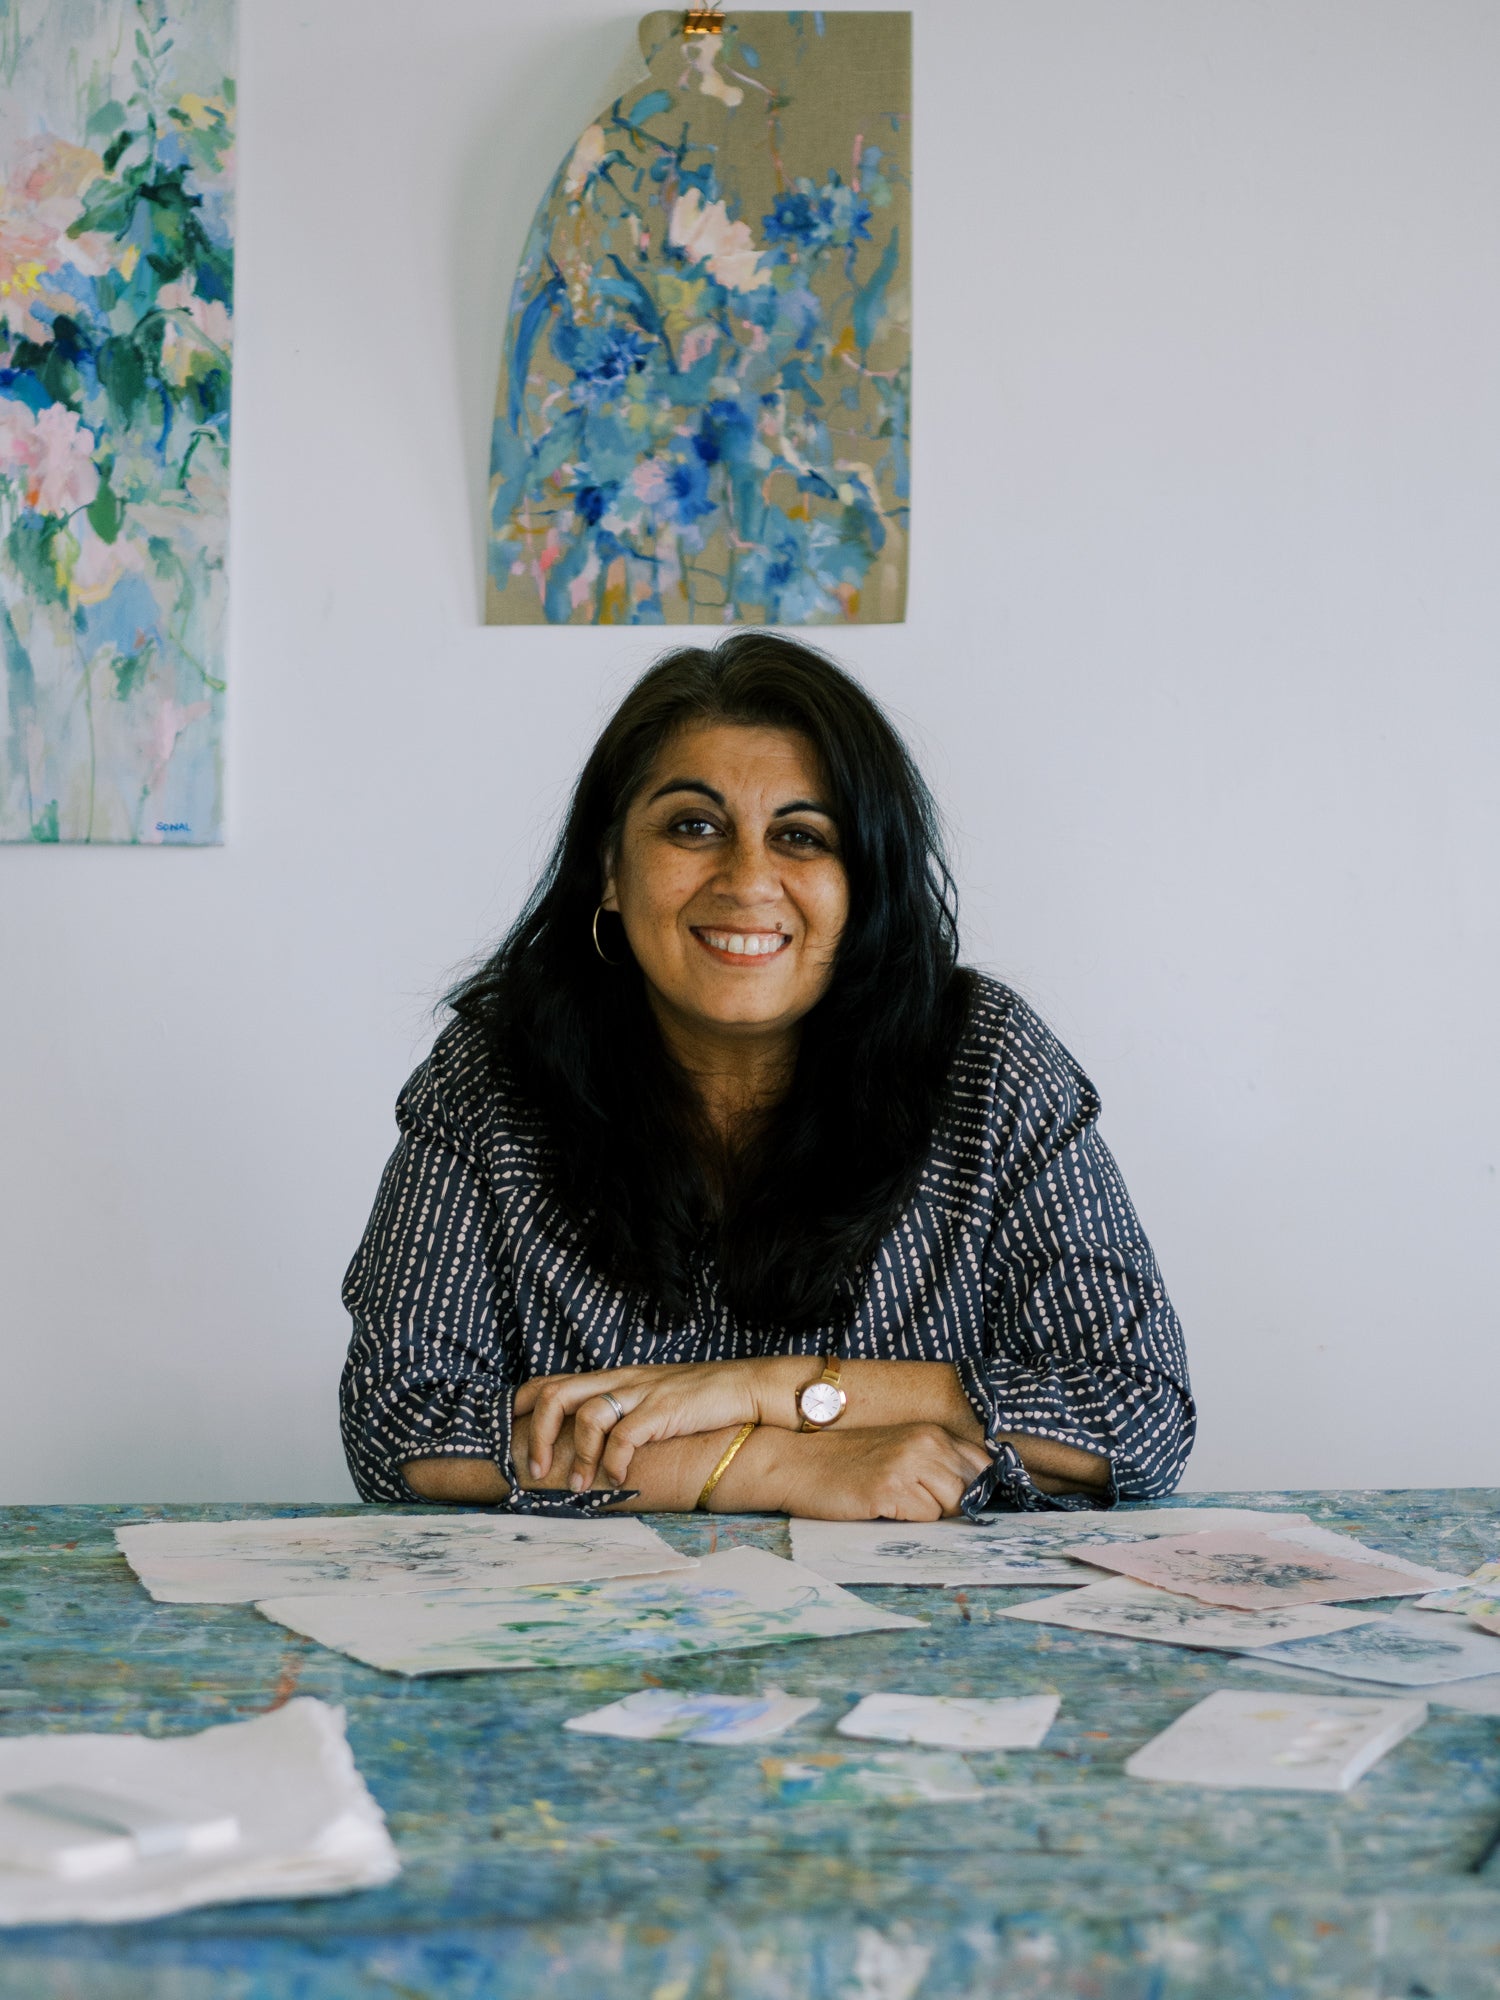 Step into Sonal Nathwani's world, where handmade paper serves as canvas for her vibrant floral and abstract paintings.